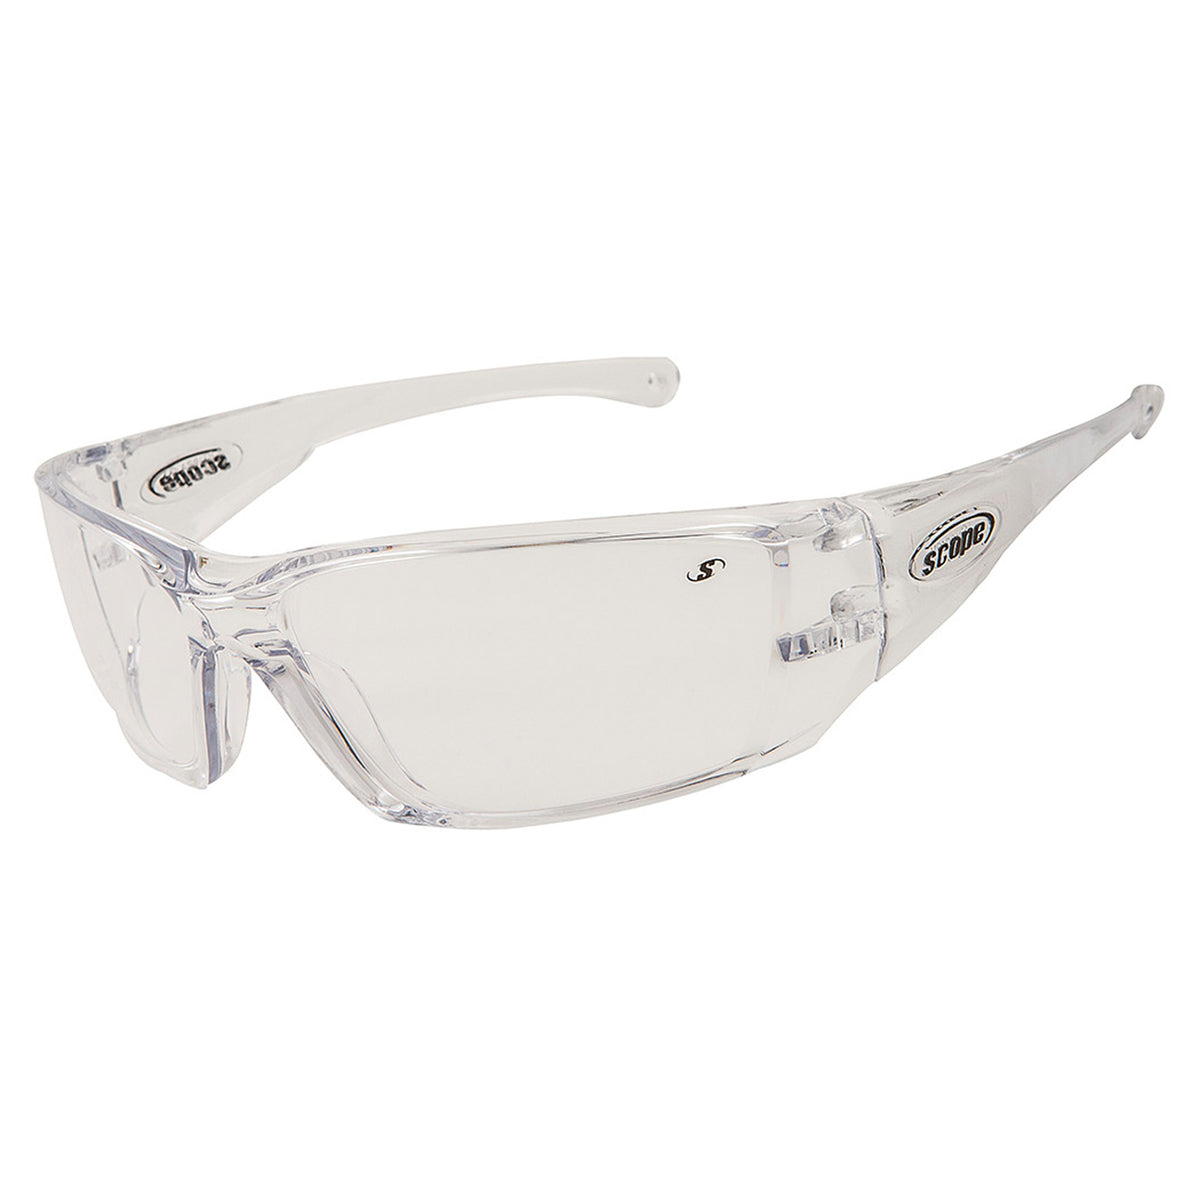 scope optics synergy safety glasses with clear lens